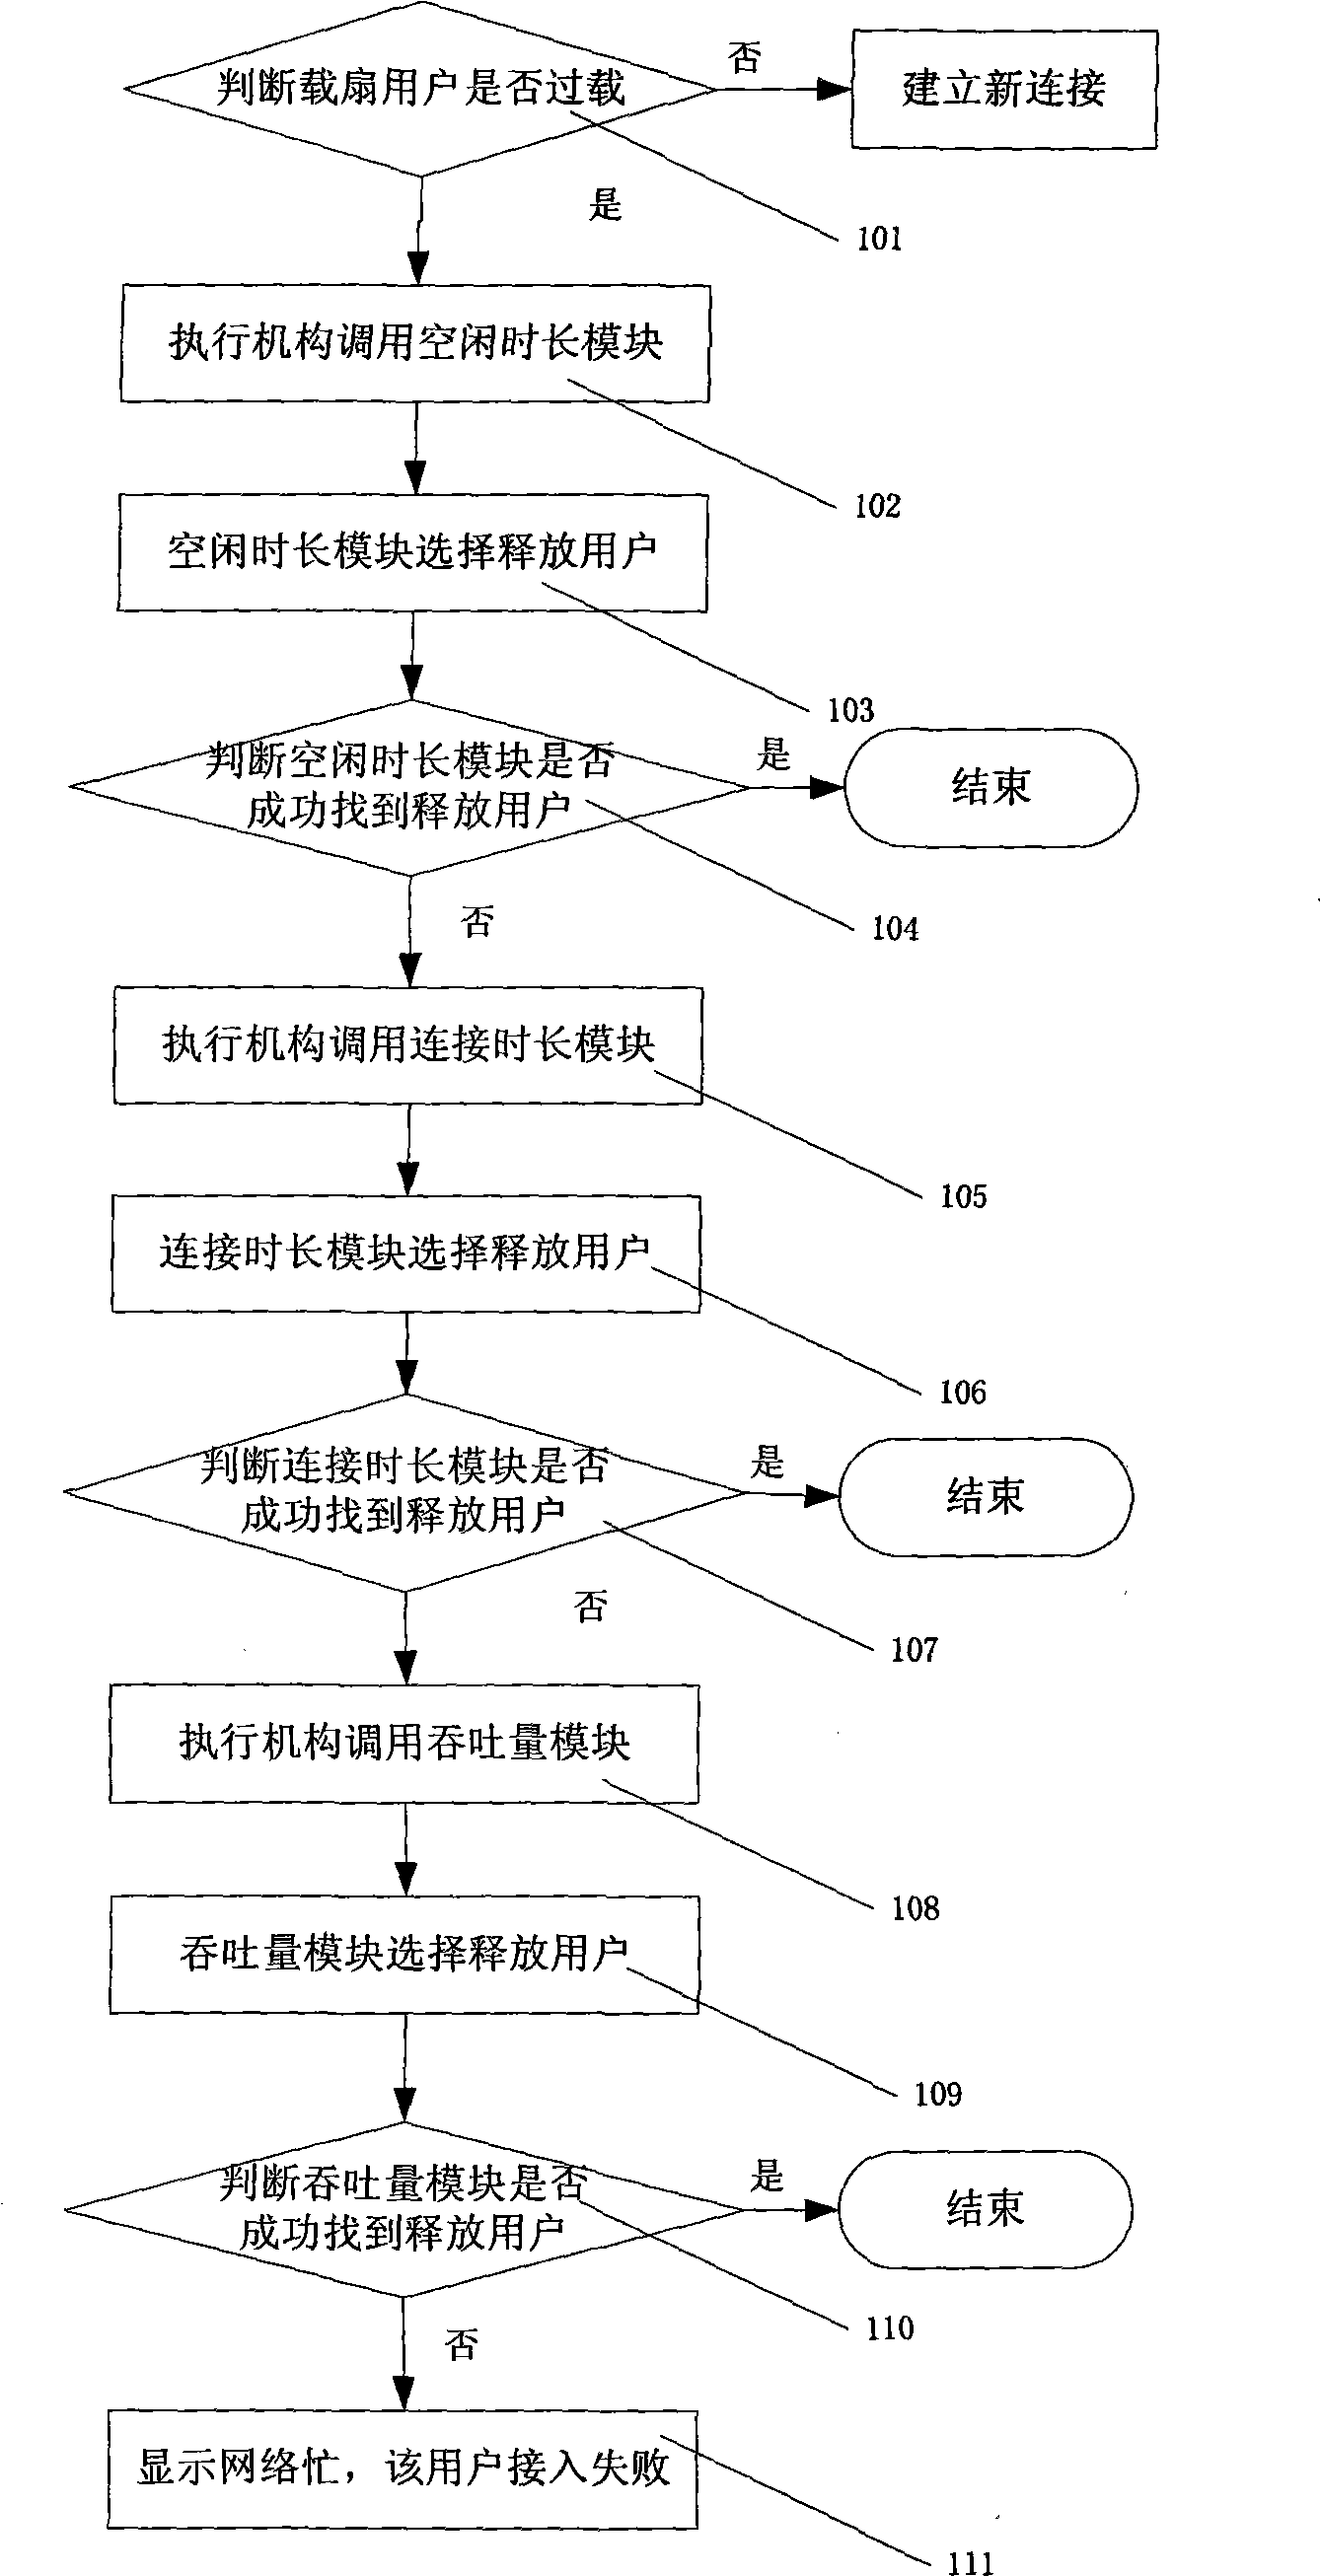 Method for controlling overload of sector users in communication system